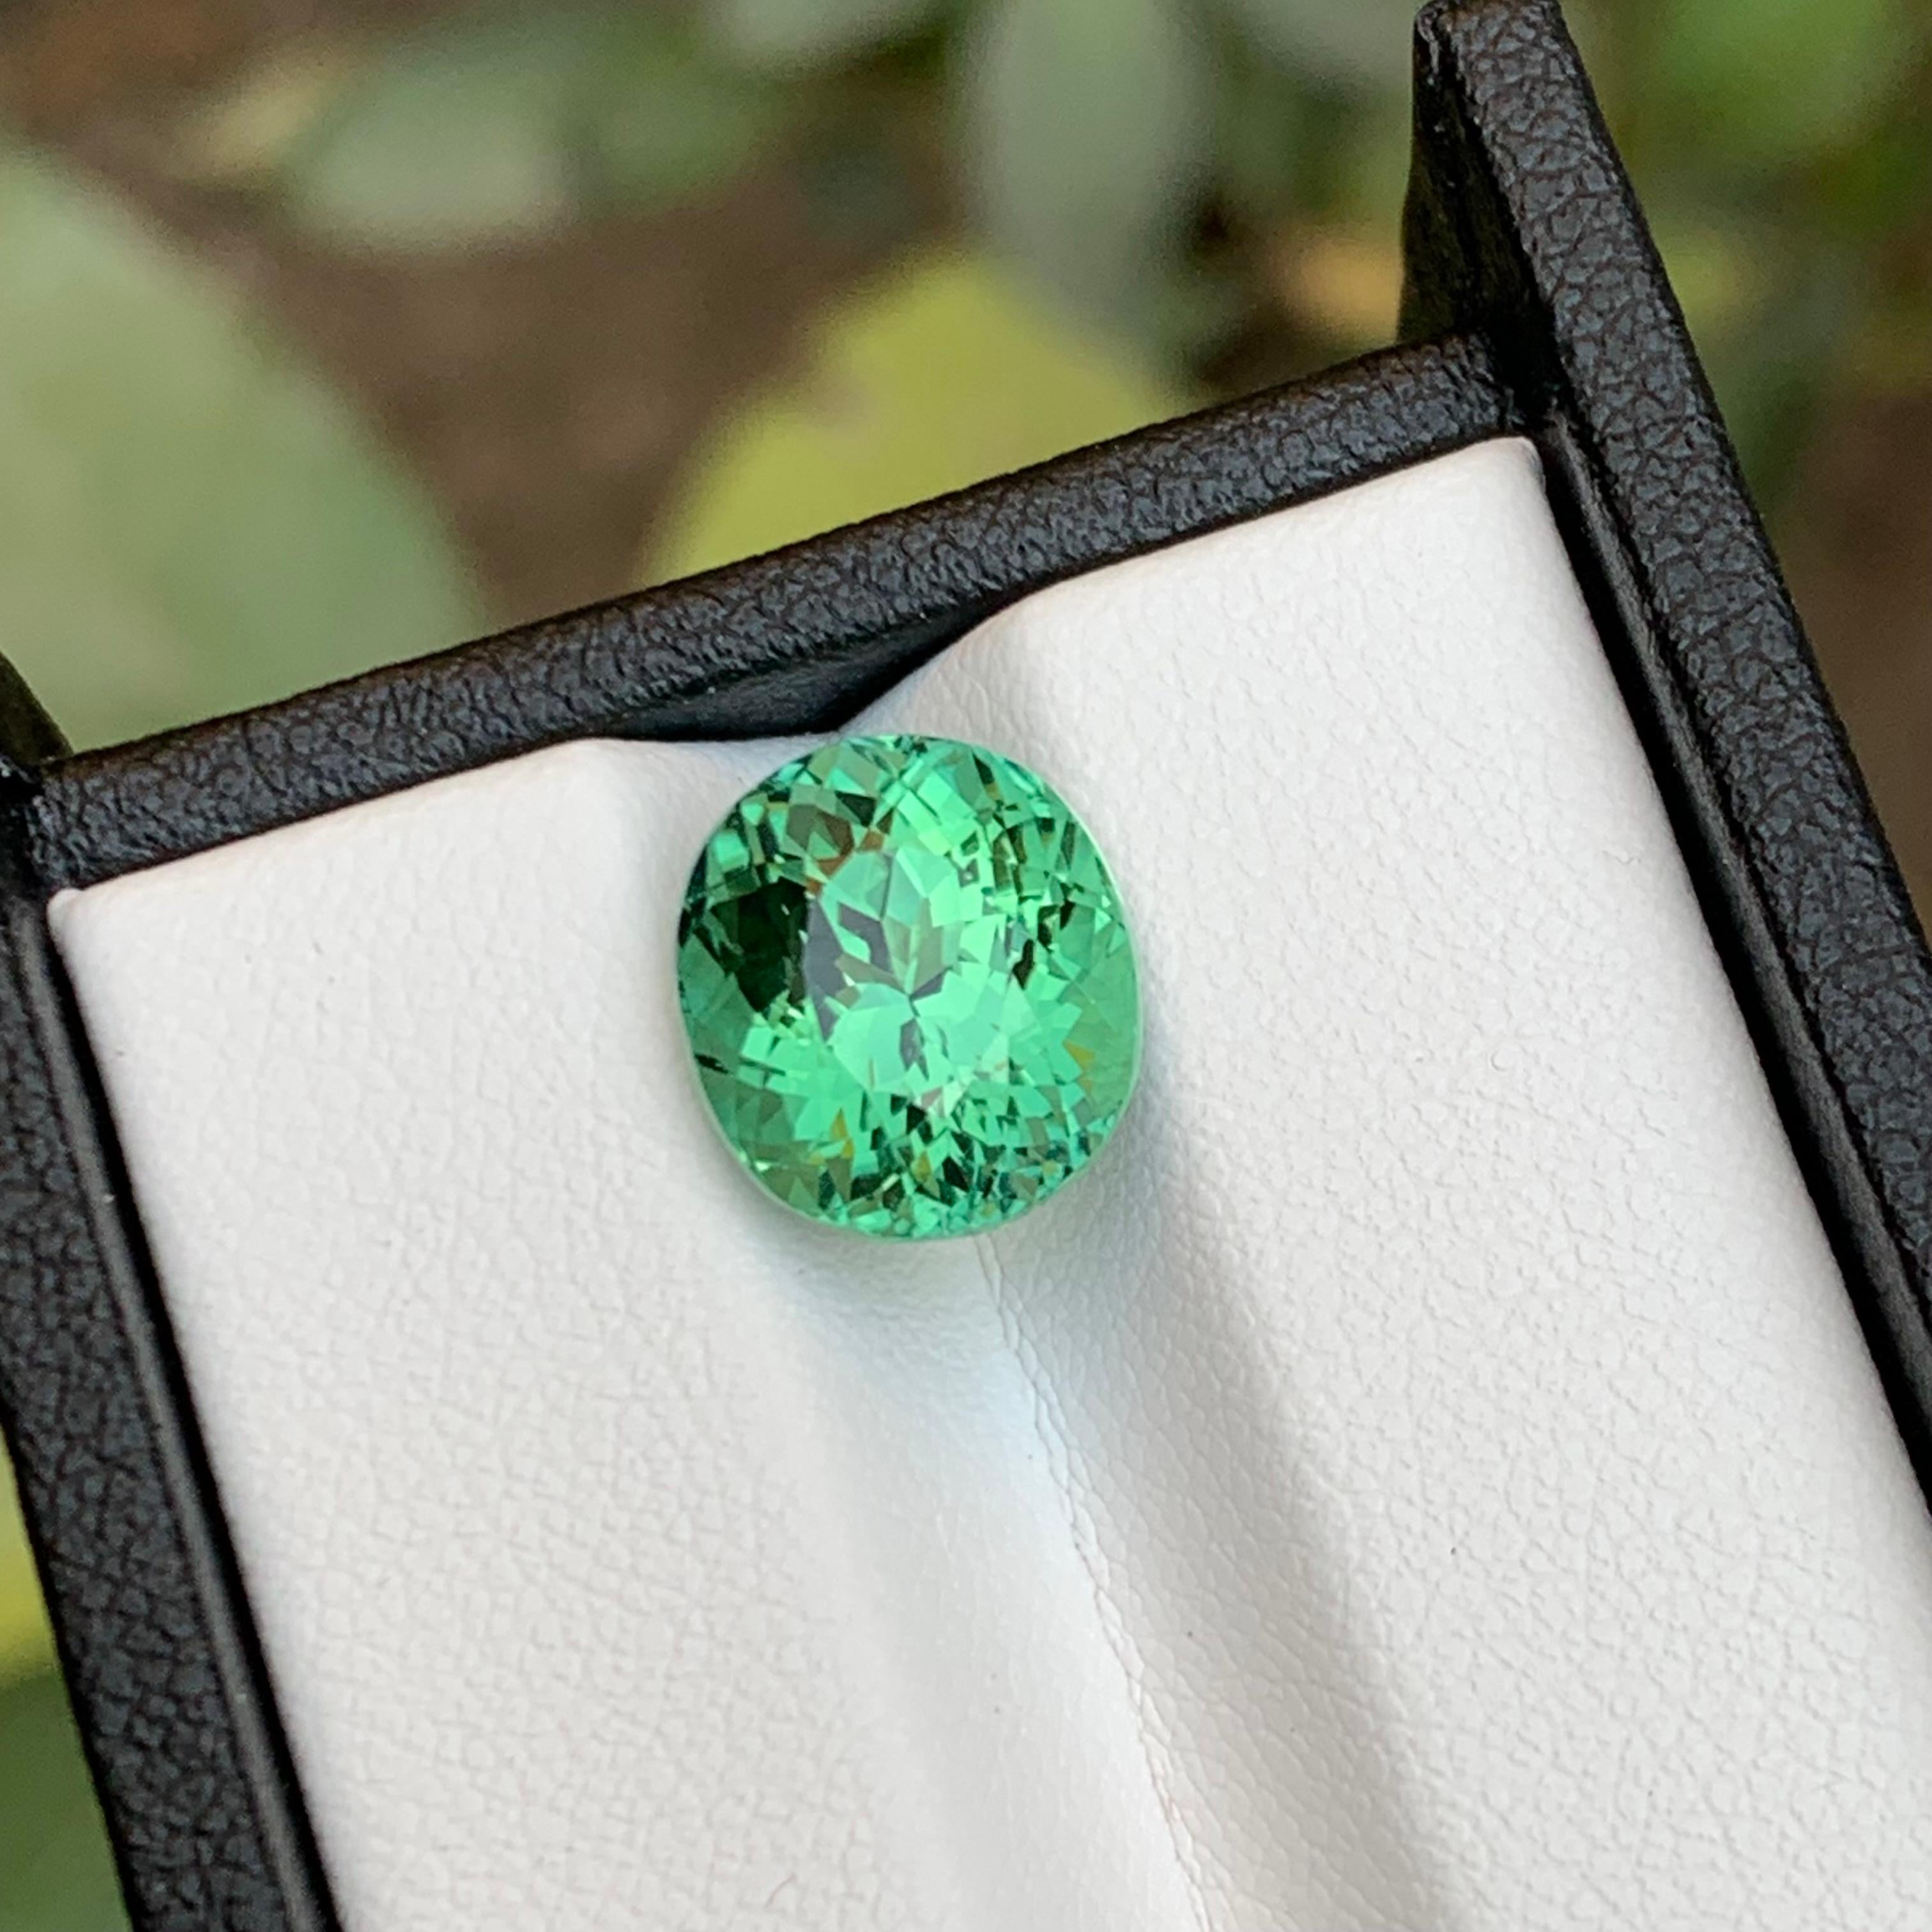 Introducing our extraordinary 5.50-carat cushion-cut bluish-green natural Tourmaline from Afghanistan. This gemstone boasts impressive clarity, enhanced by excellent luster, making it a dazzling choice for any jewelry setting. Elevate your style